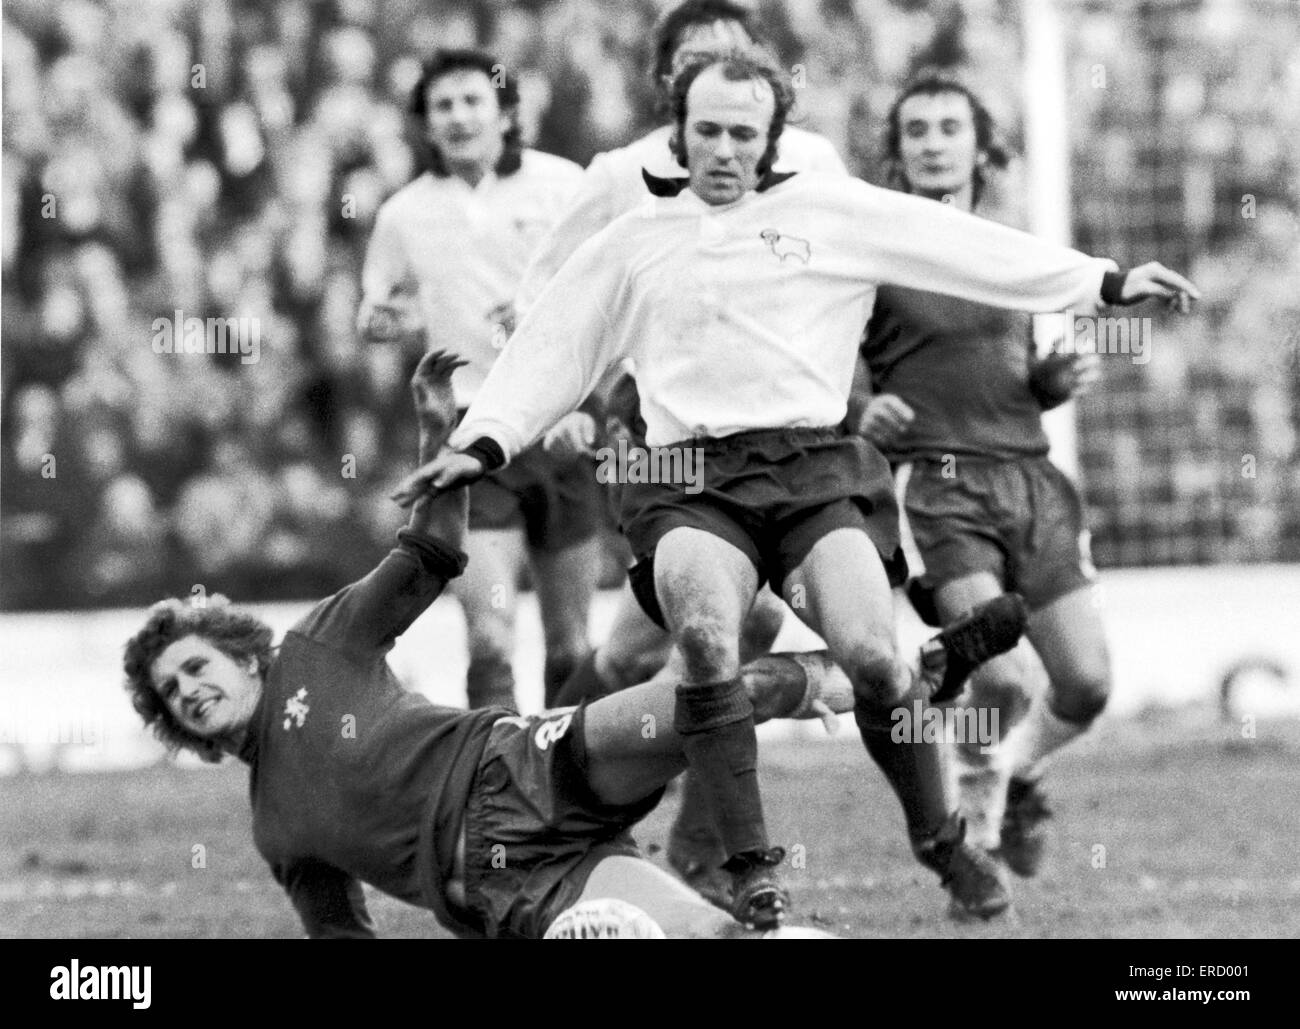 English League Division One match at Stamford Bridge. Chelsea 1 v Derby County 1. Derby's Archie Gemmill evades a tackle from Chris Garland. 19th January 1974. Stock Photo